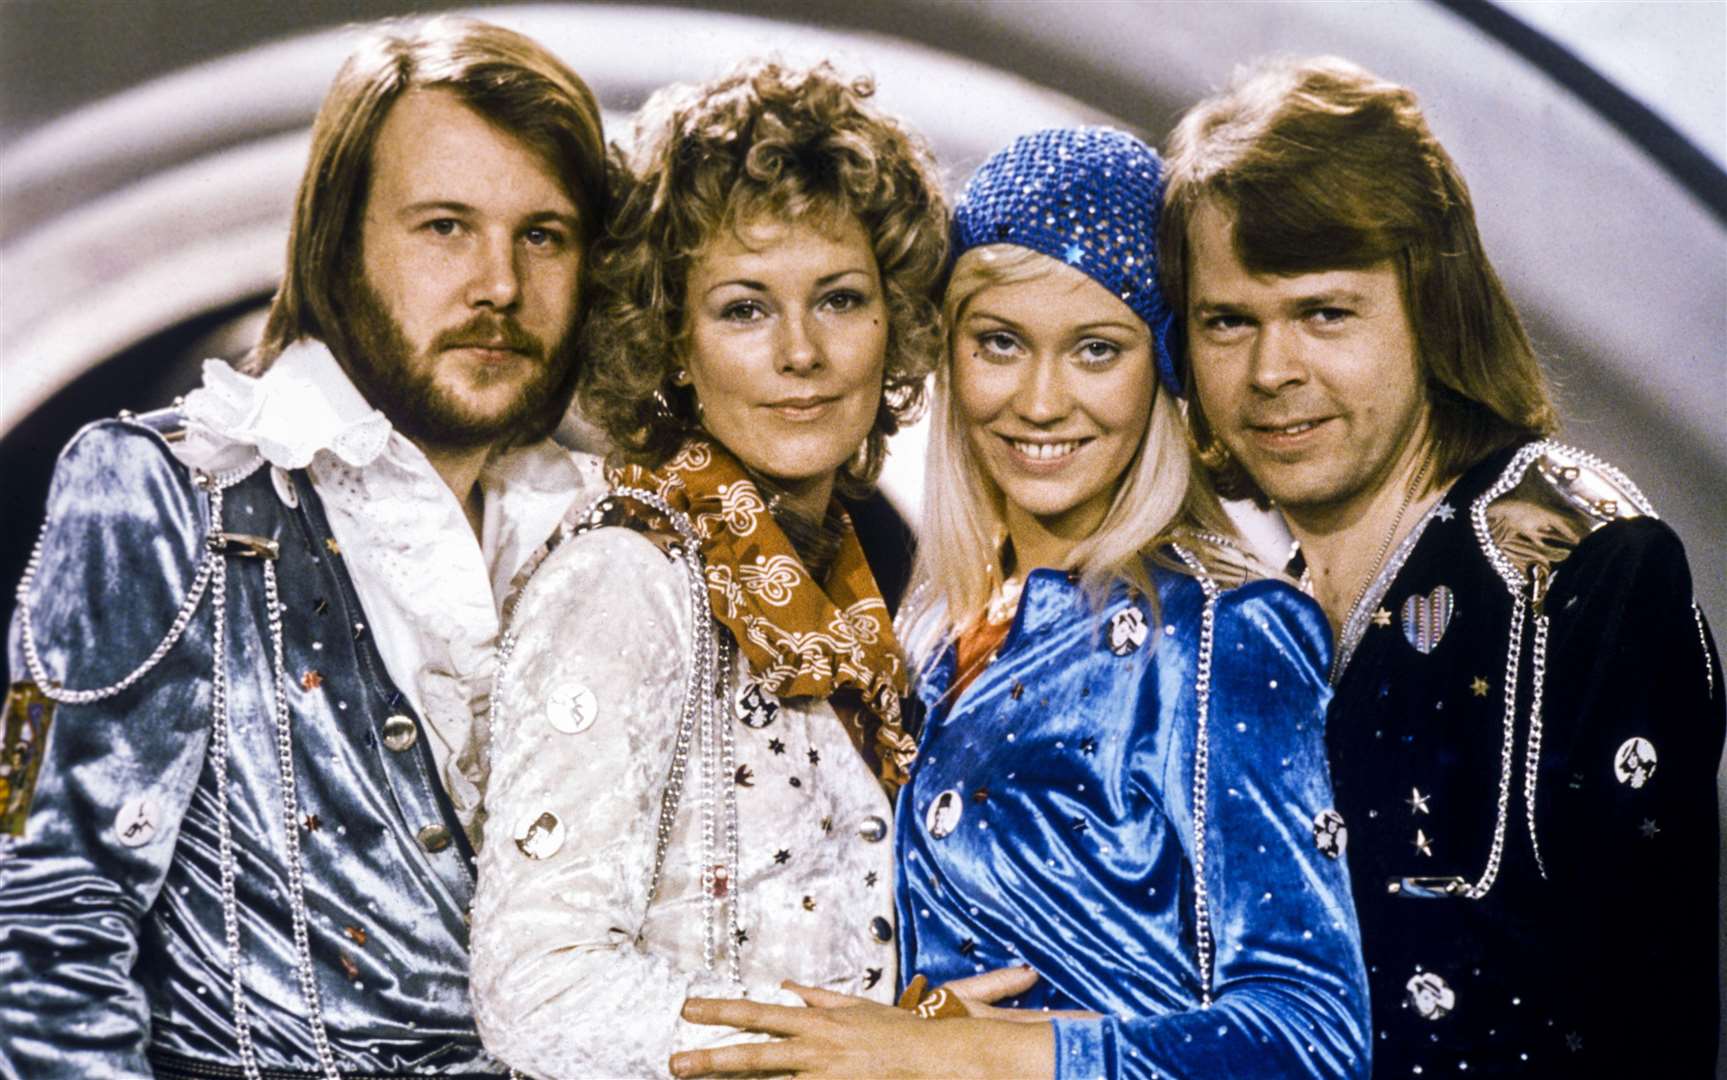 It’s been 50 years since pop group Abba won Eurovision with their single Waterloo